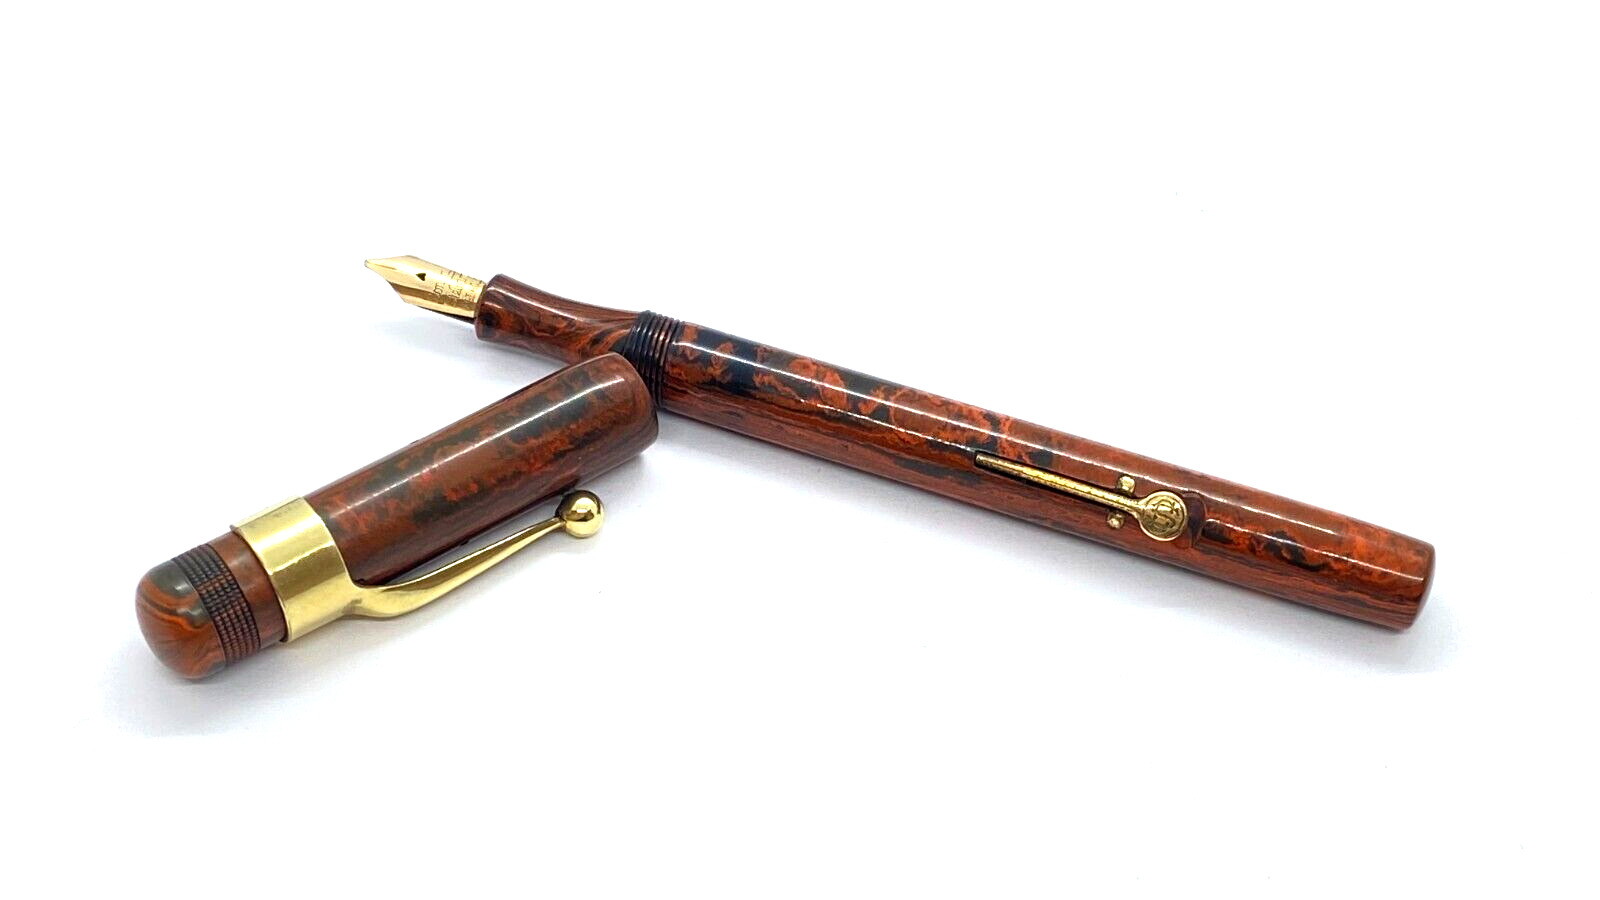 THE CONWAY STEWART PEN IN RED MOTTLED, SPRINGY 14K OBLIQUE BROAD NIB ENGLAND